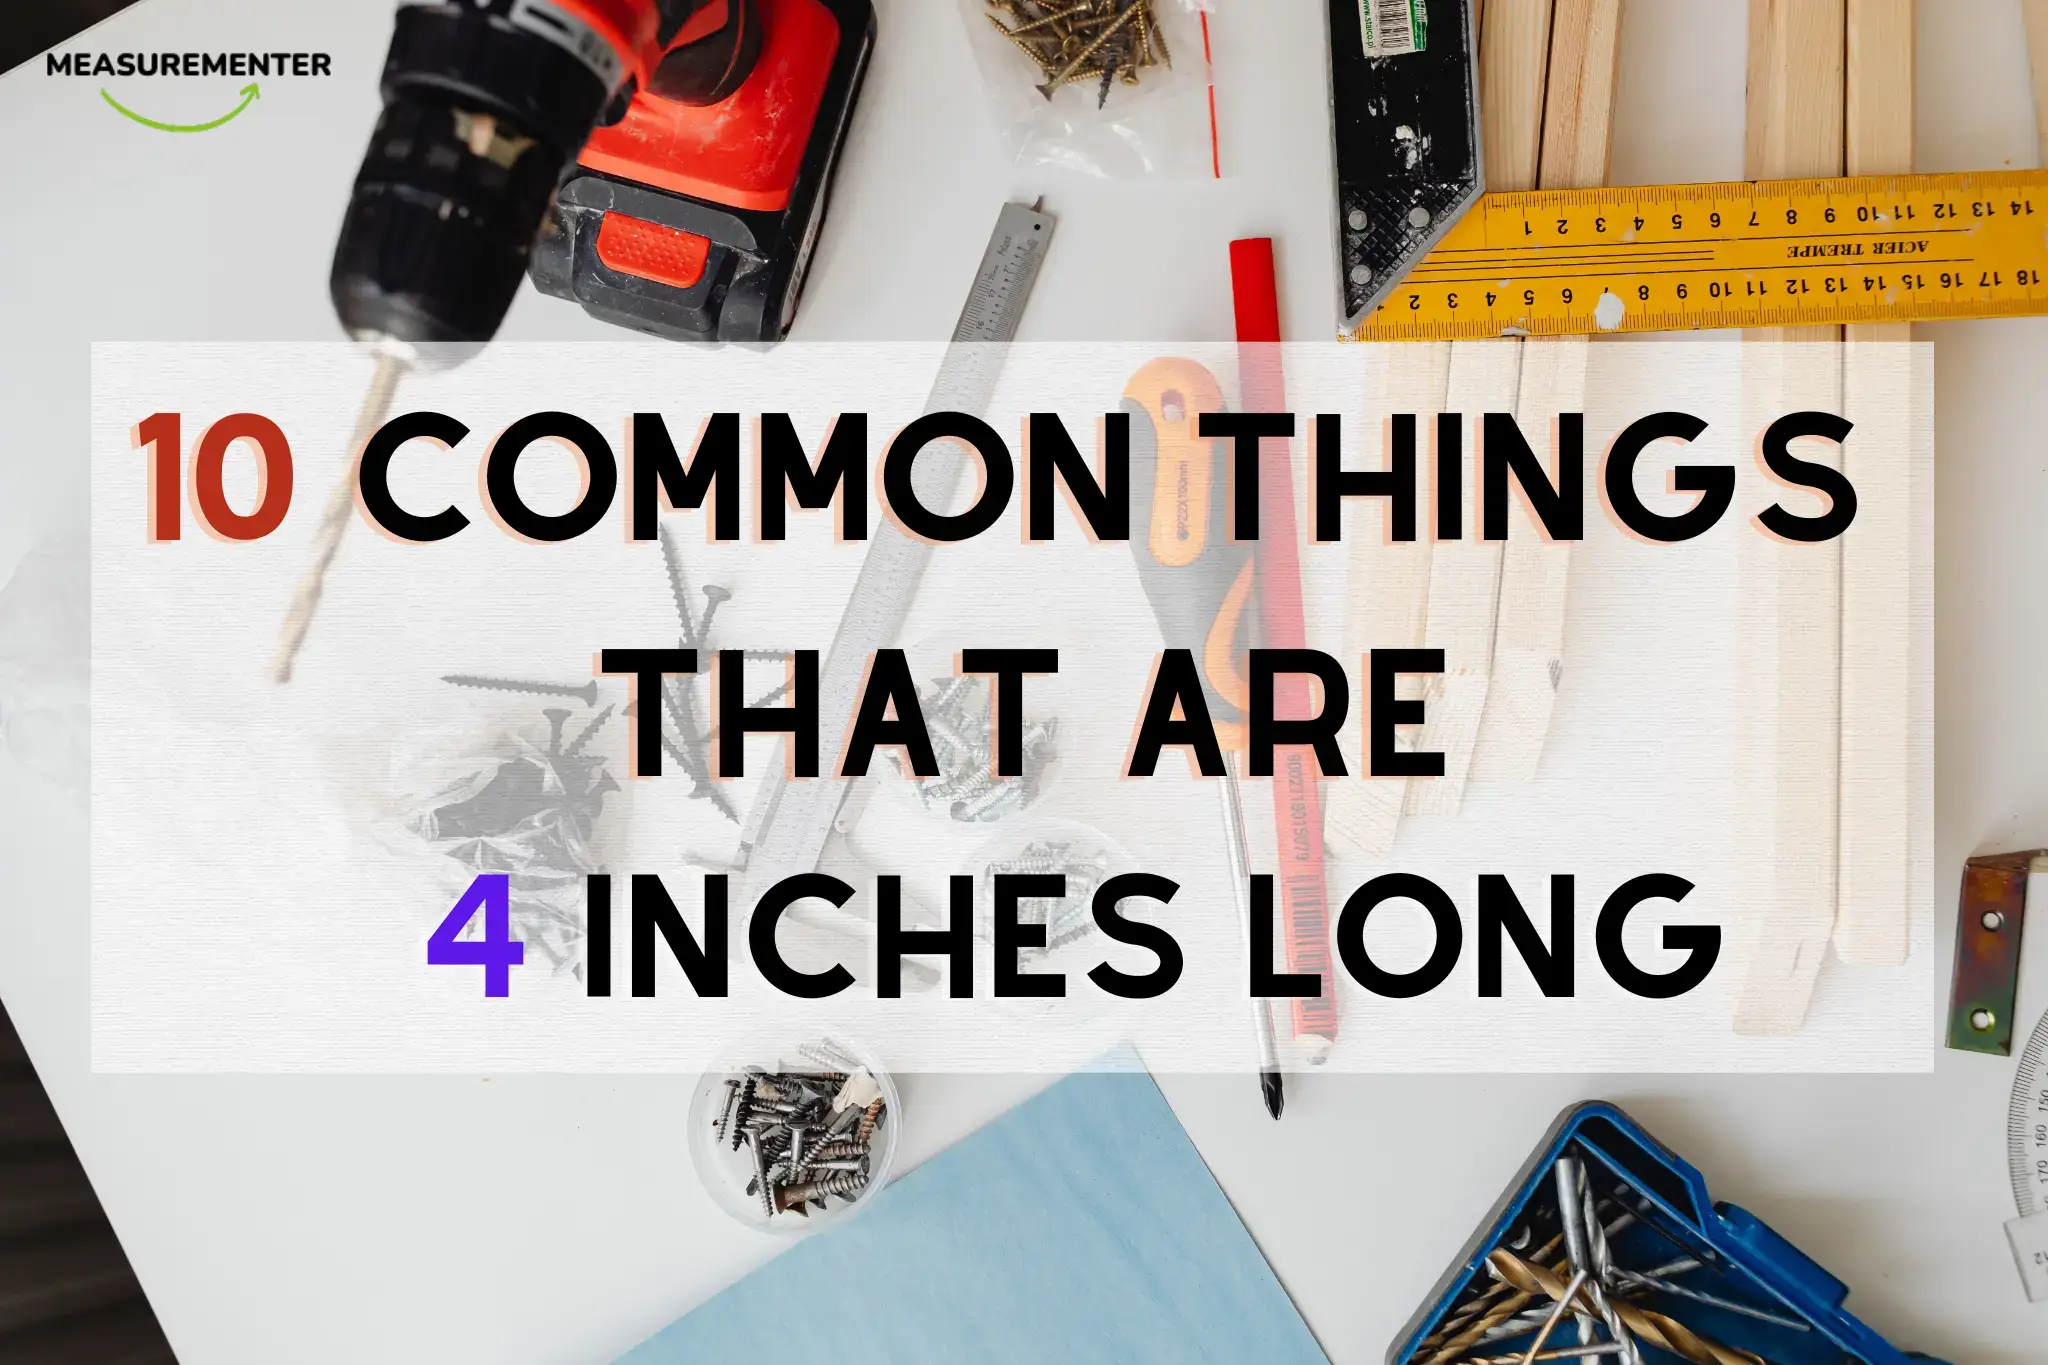 10 Common things that are 4 Inches long. How long is 4 inches as compared to an object?